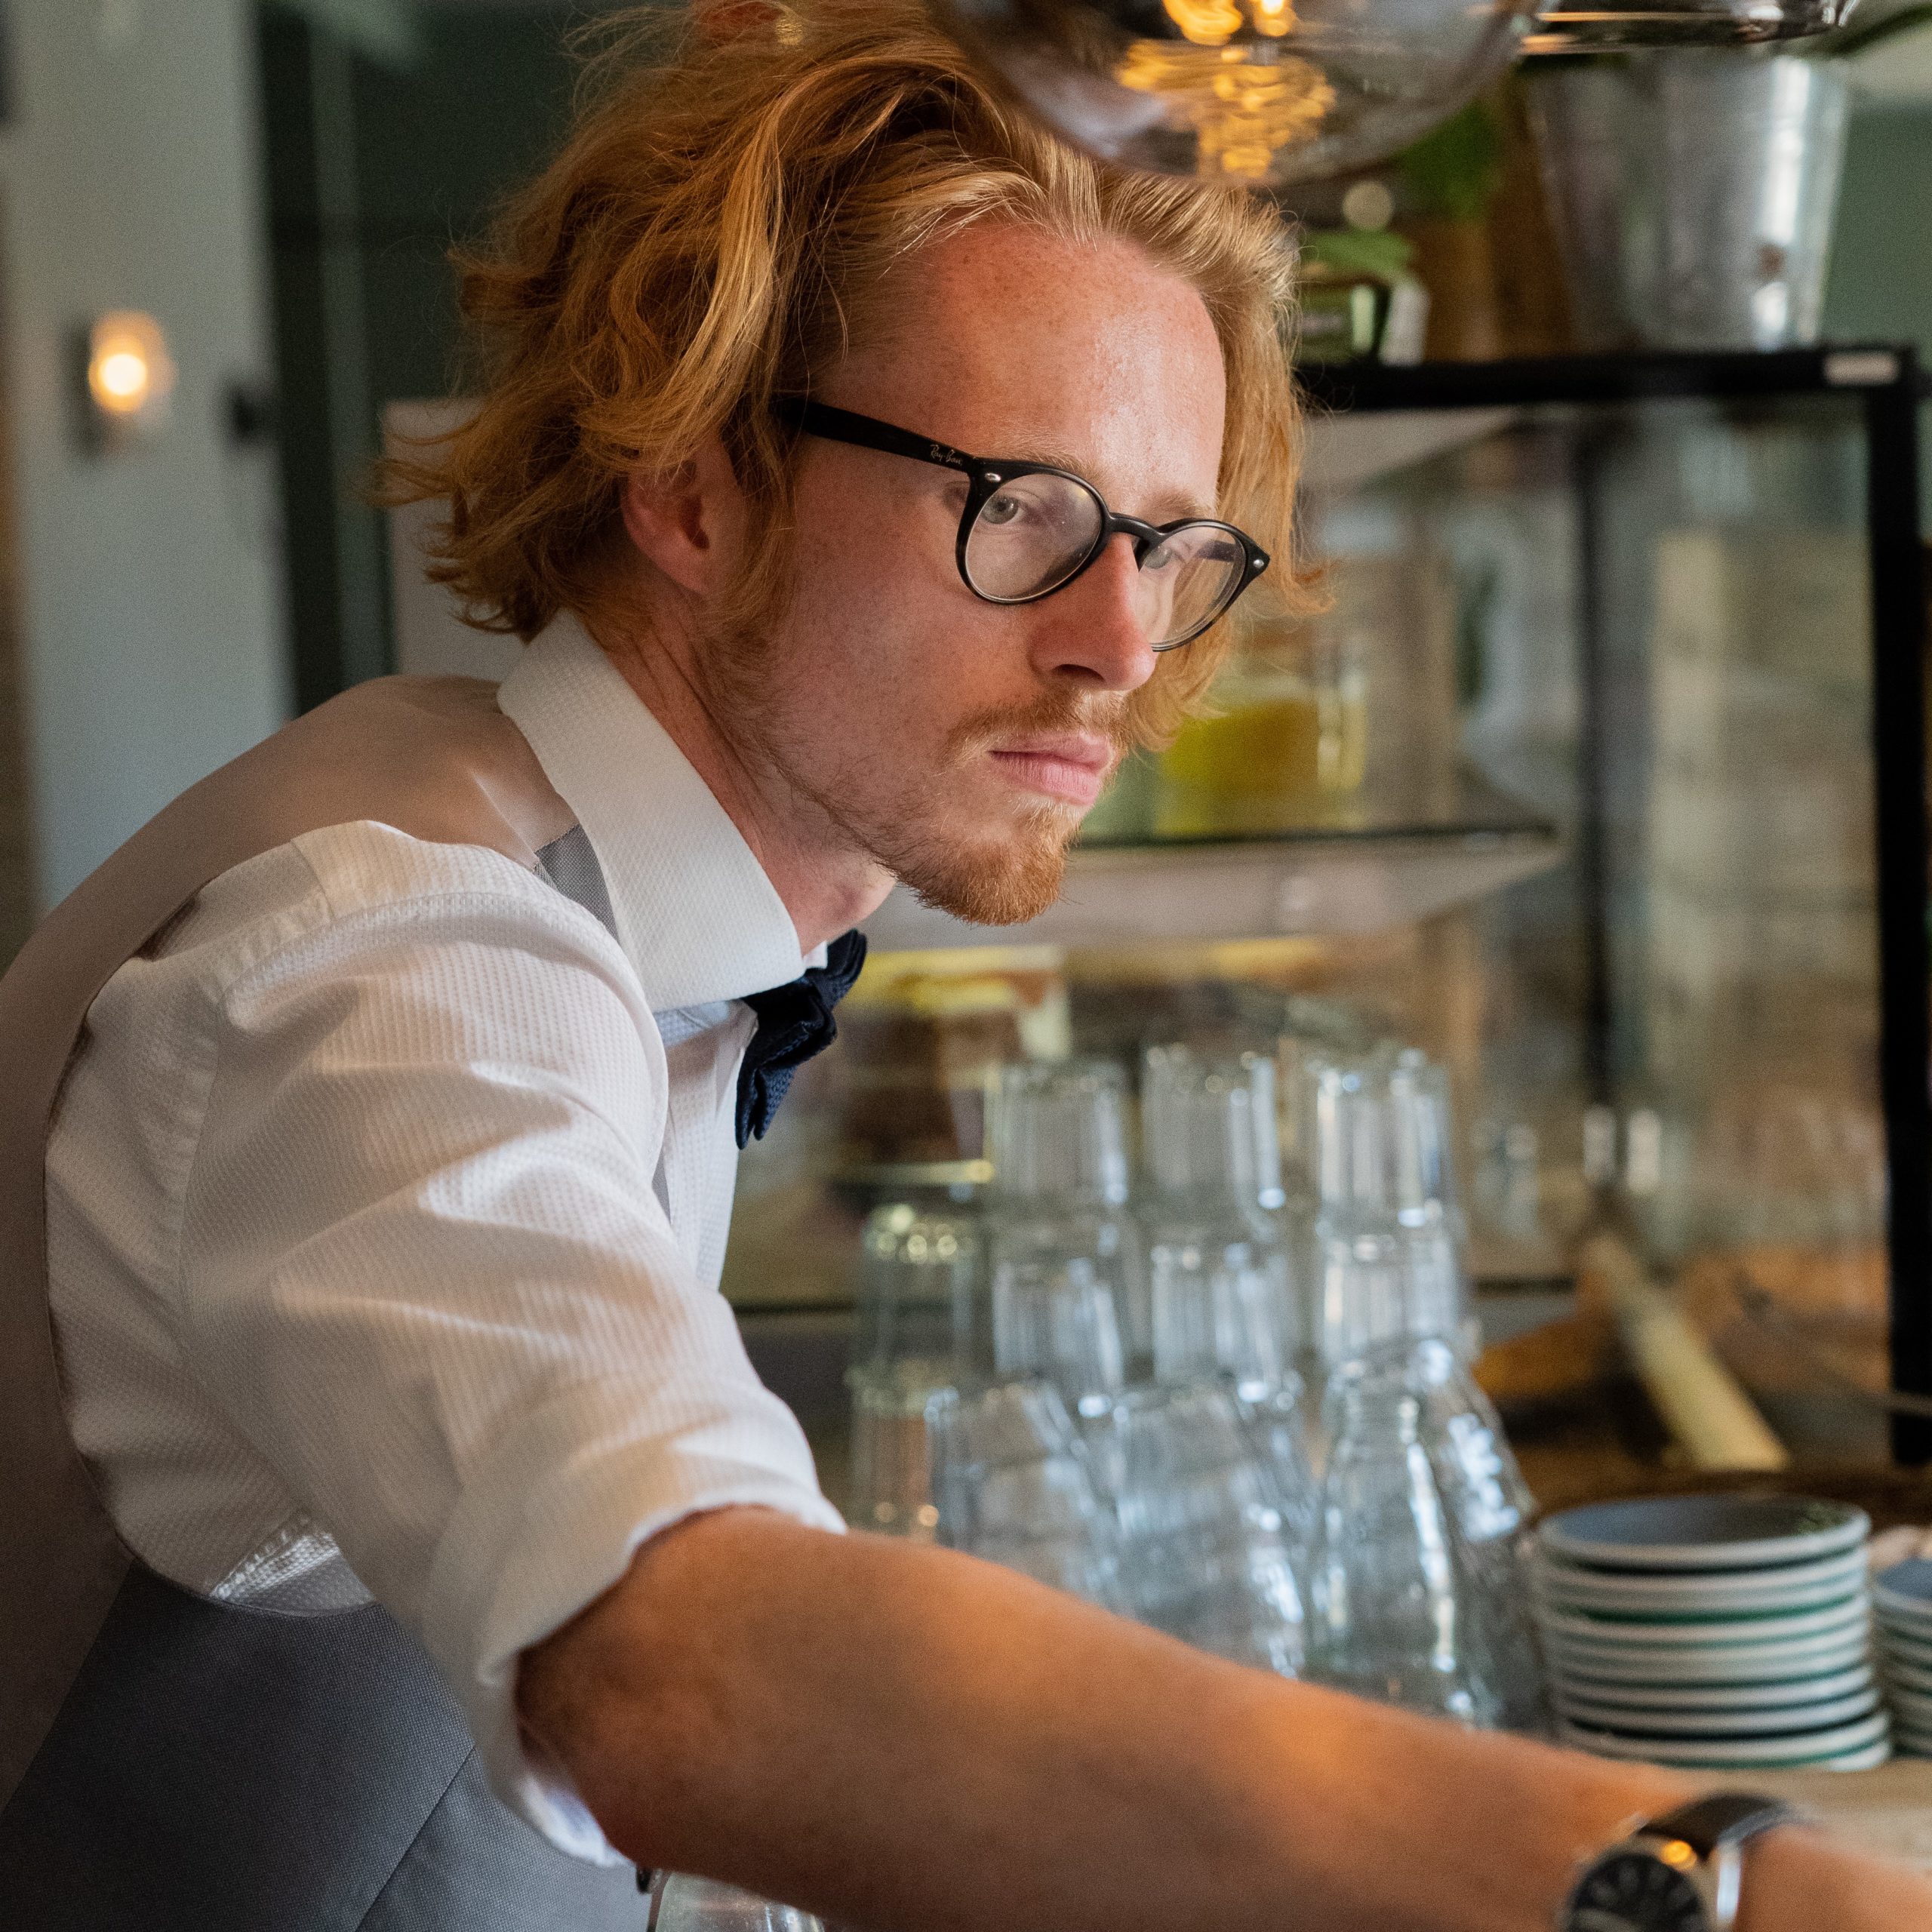 Max-Merlin Ries, guest on humans of hospitality at smack, while working